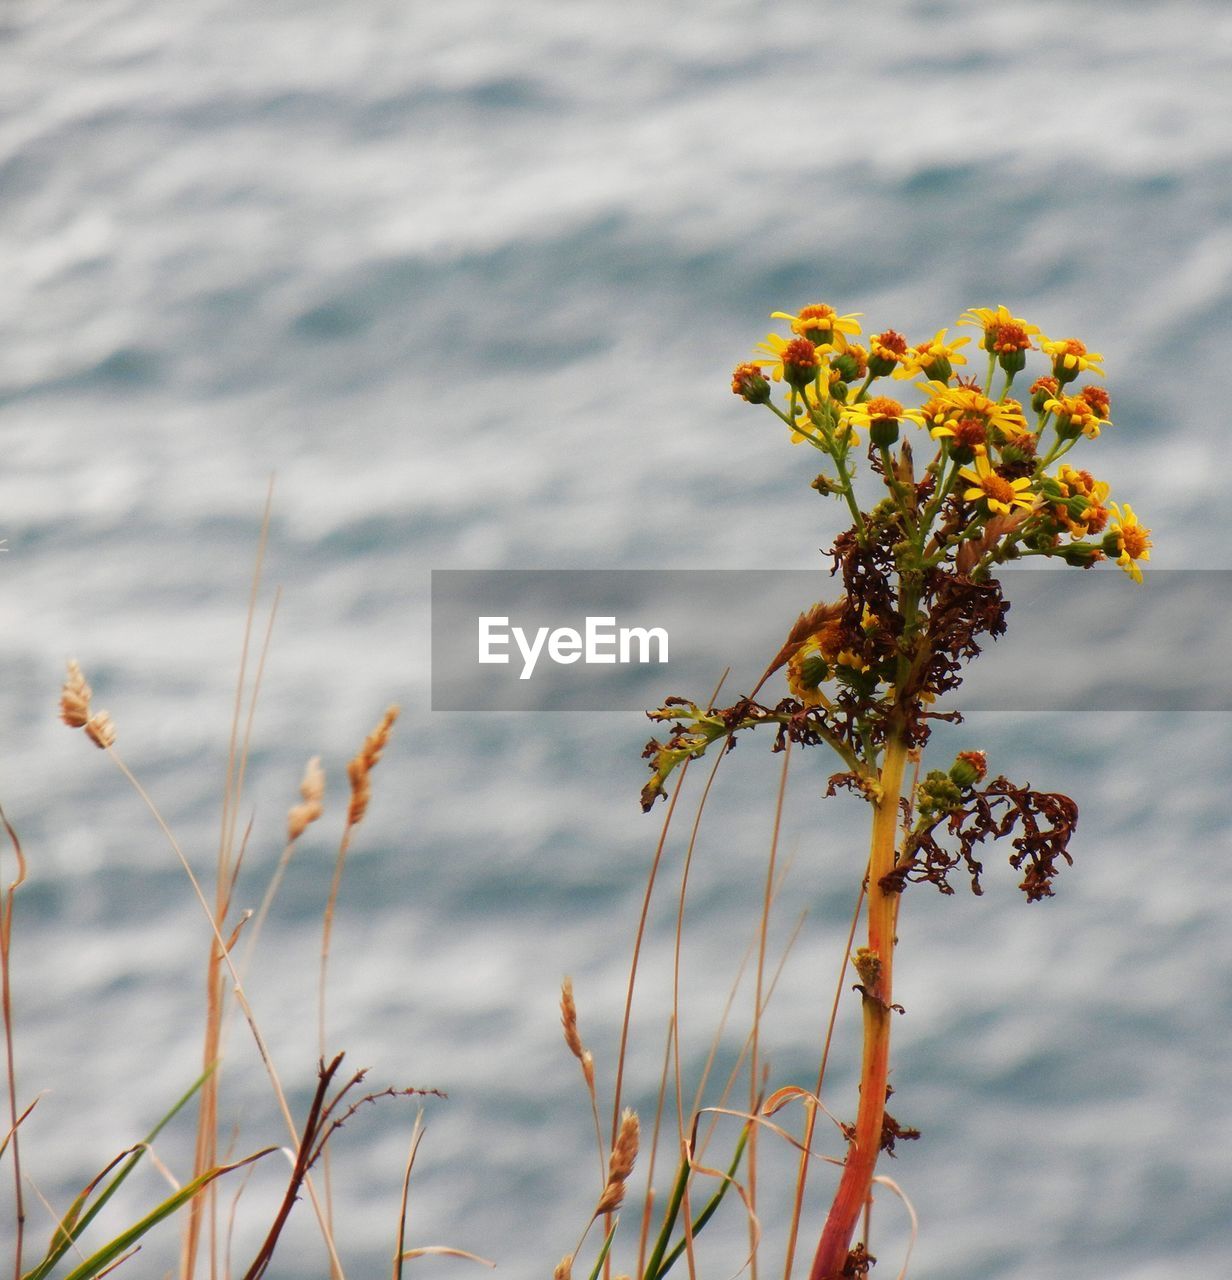 Close-up of yellow flowering plant against sea